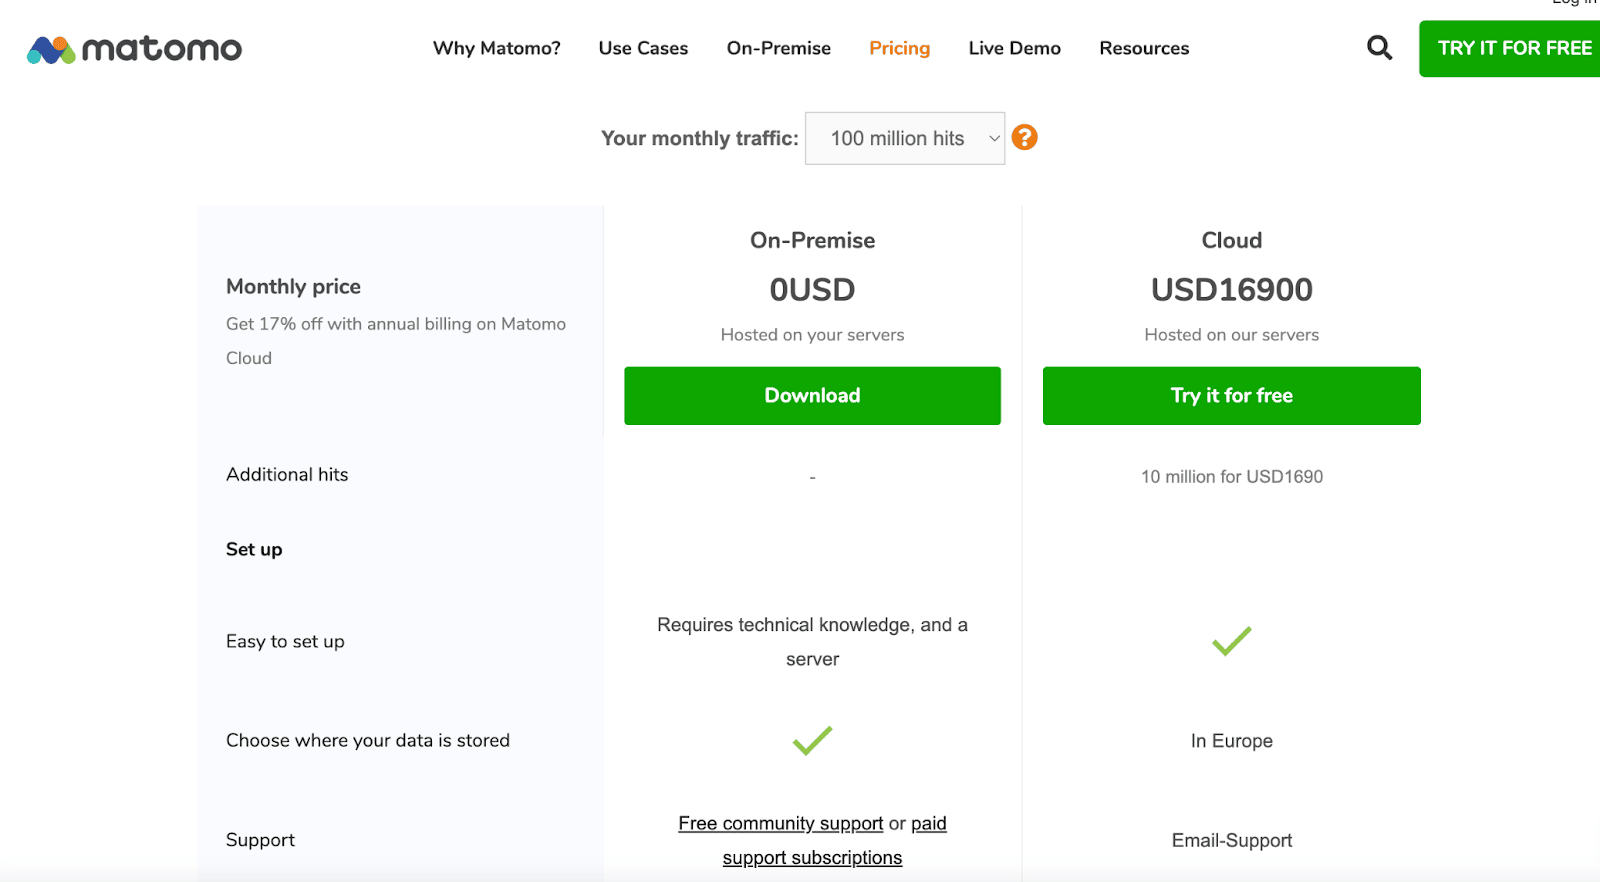 The pricing page for the highest tier of Matomo